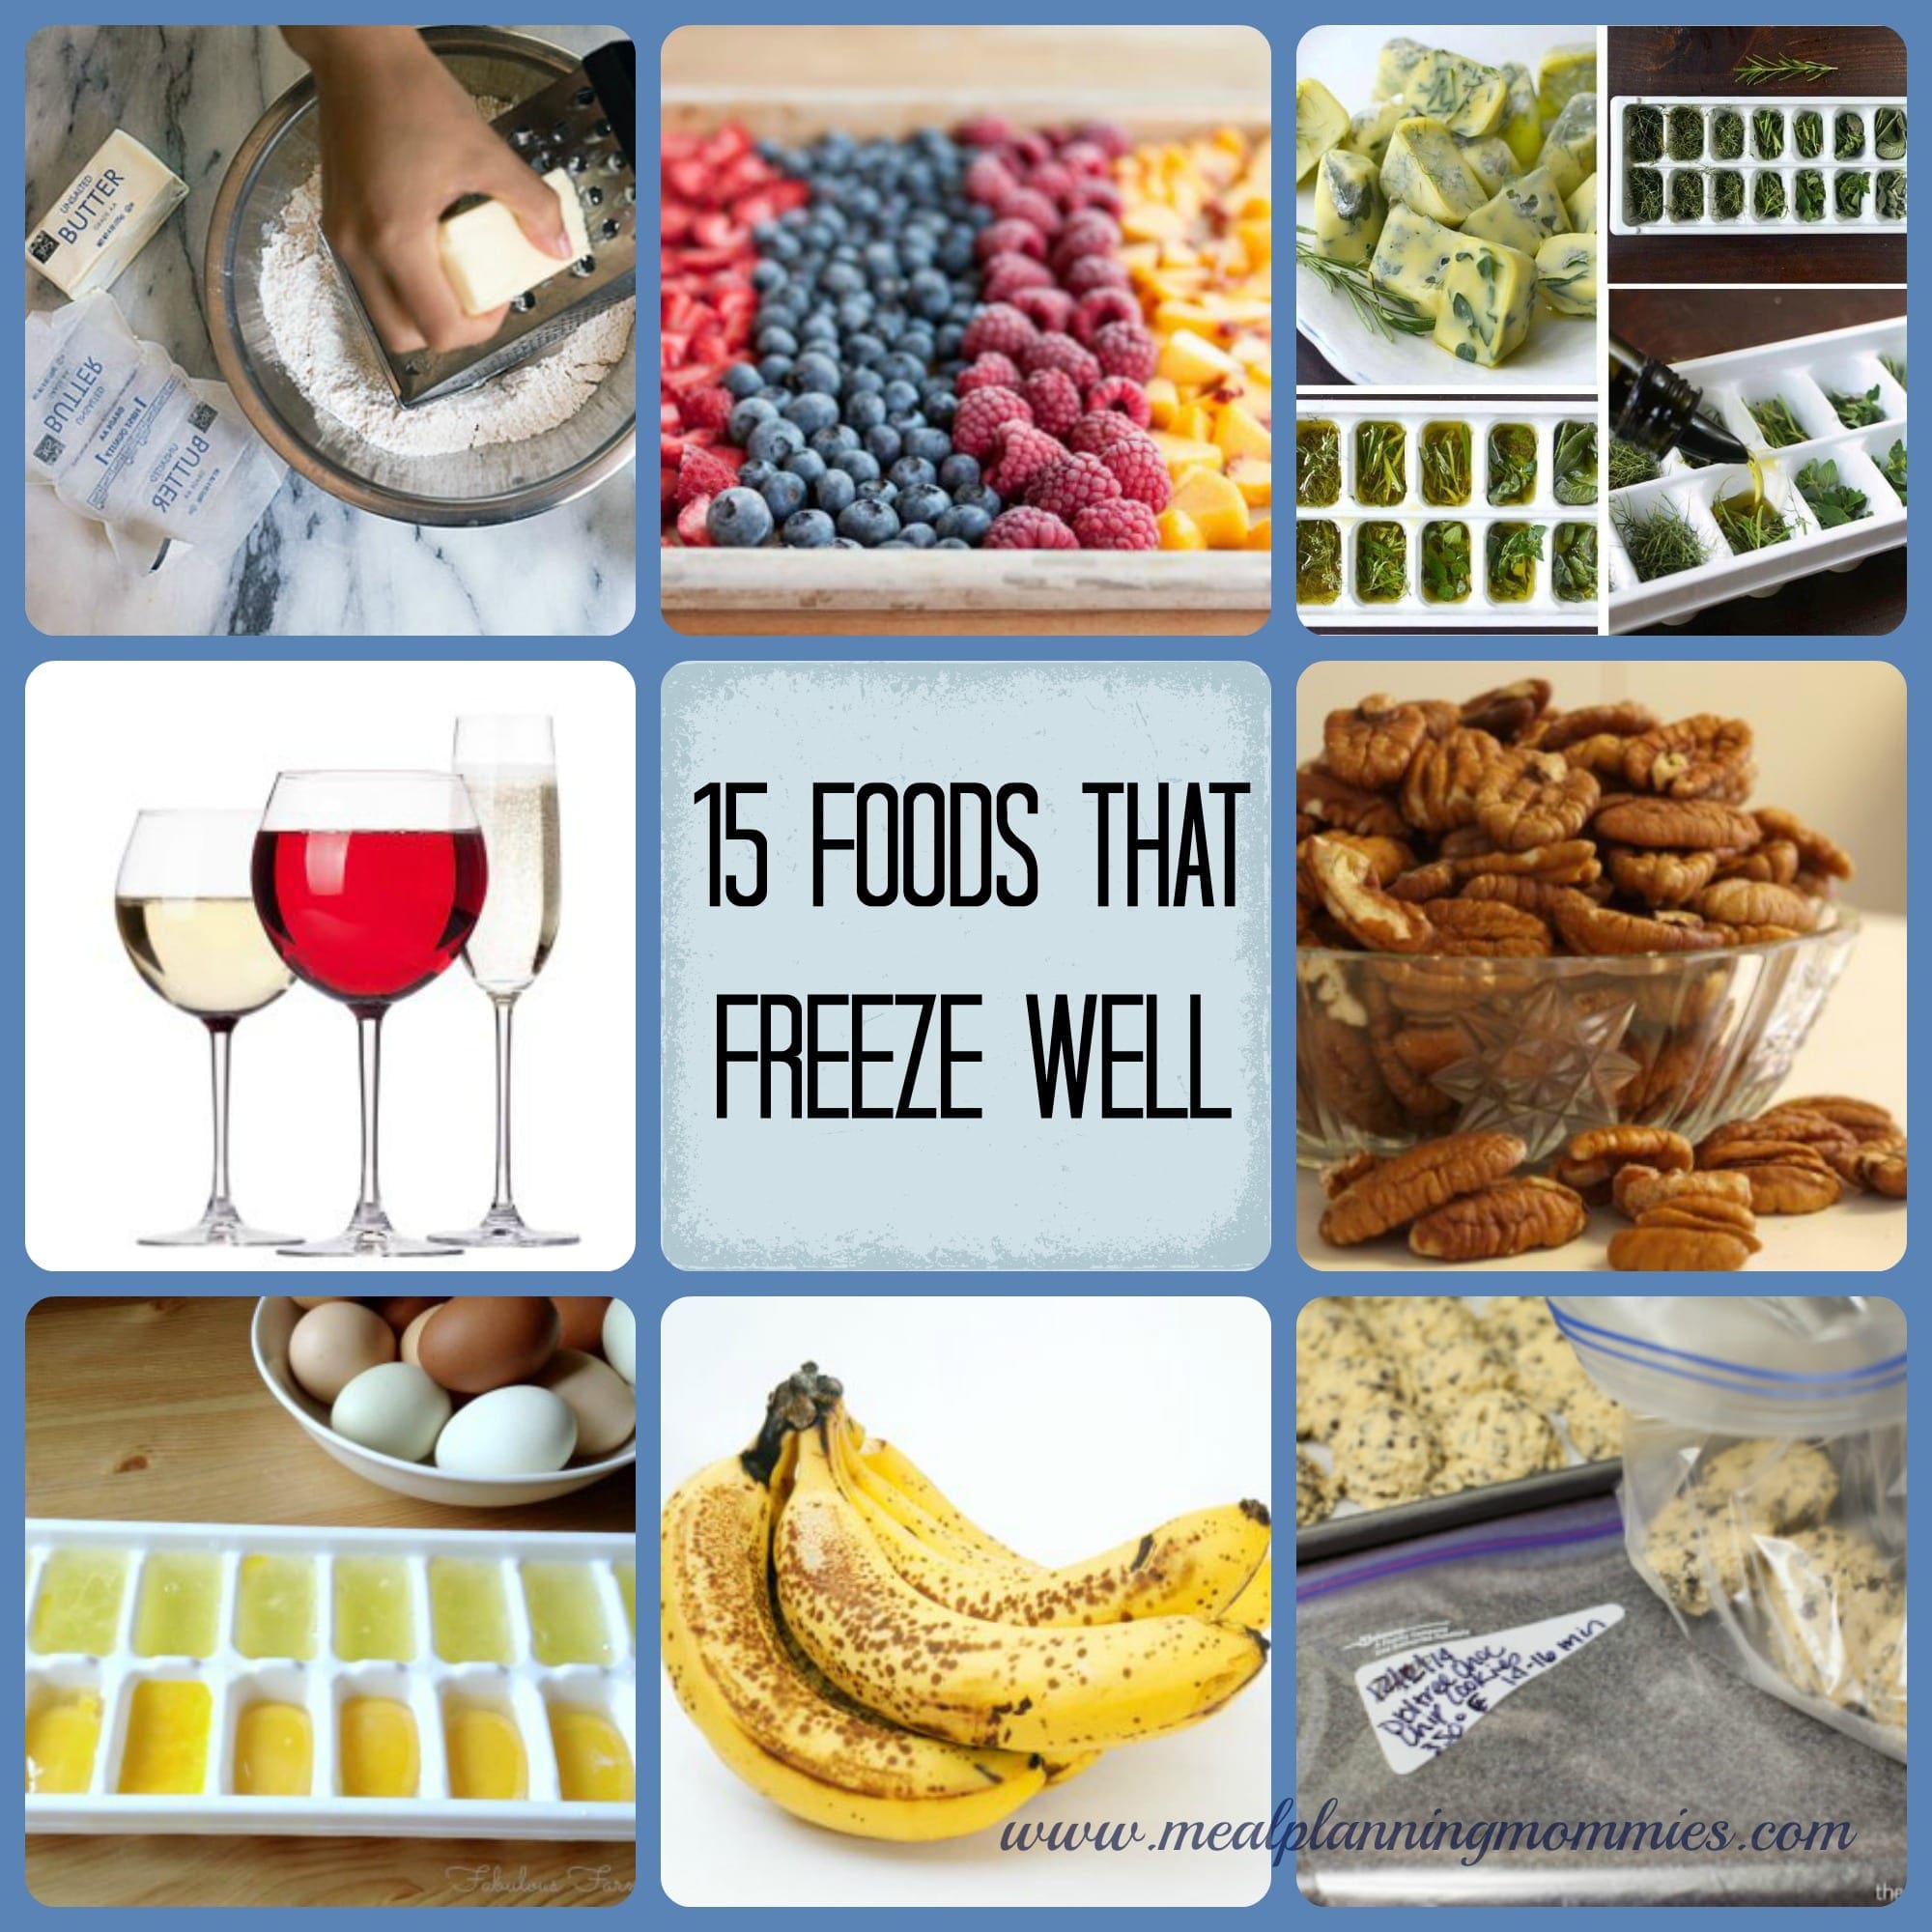 15 foods that freeze well